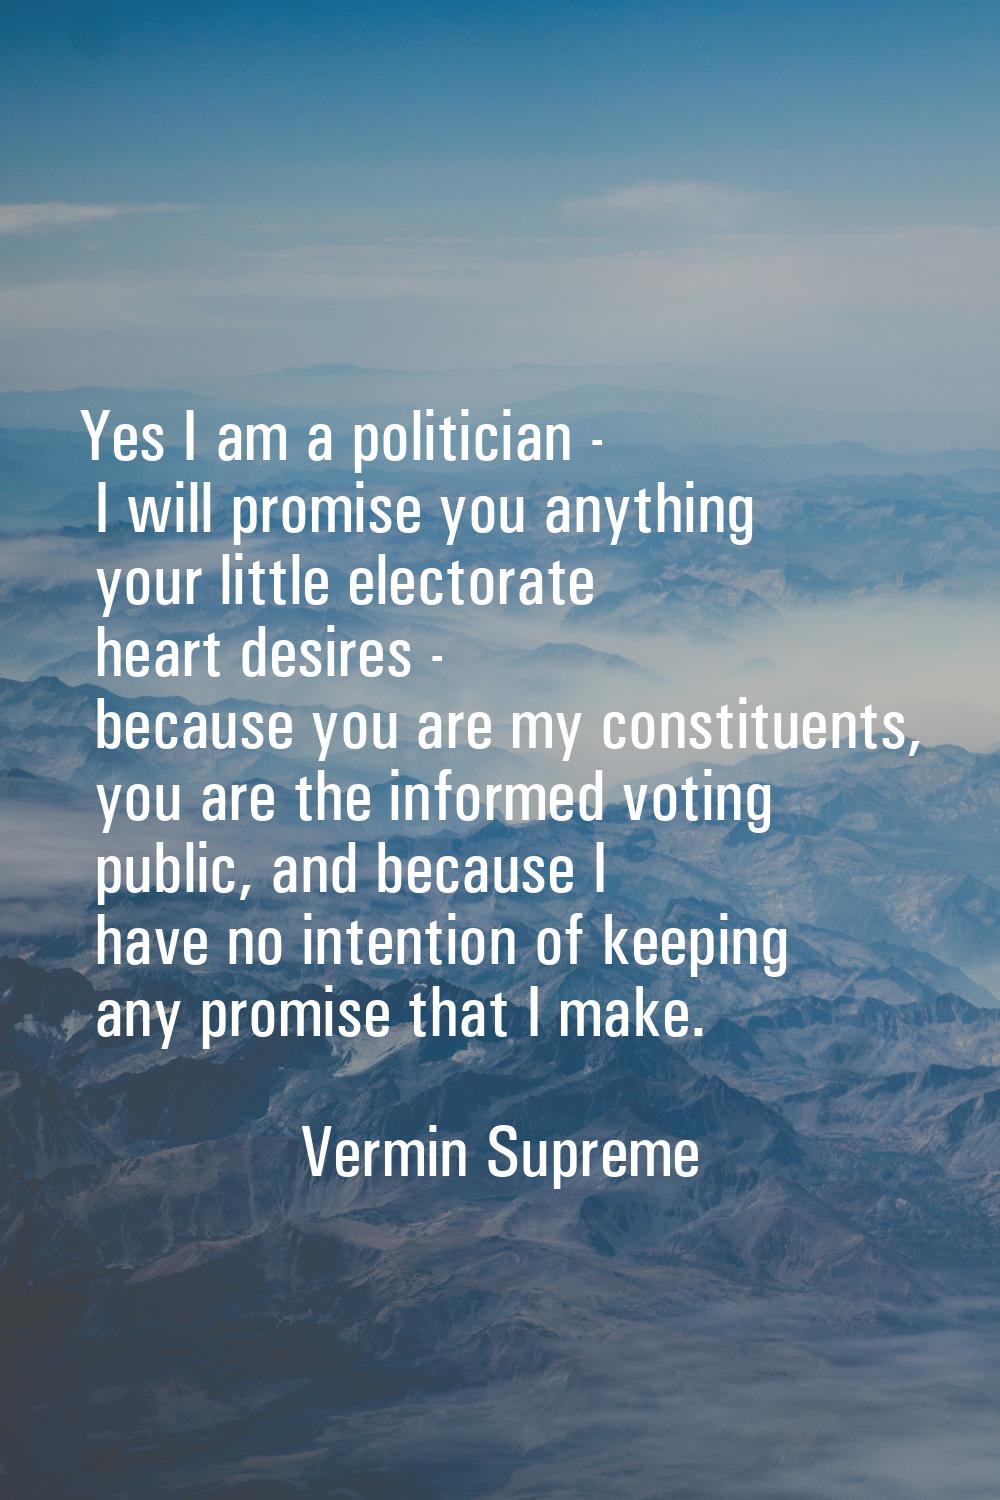 Yes I am a politician - I will promise you anything your little electorate heart desires - because 